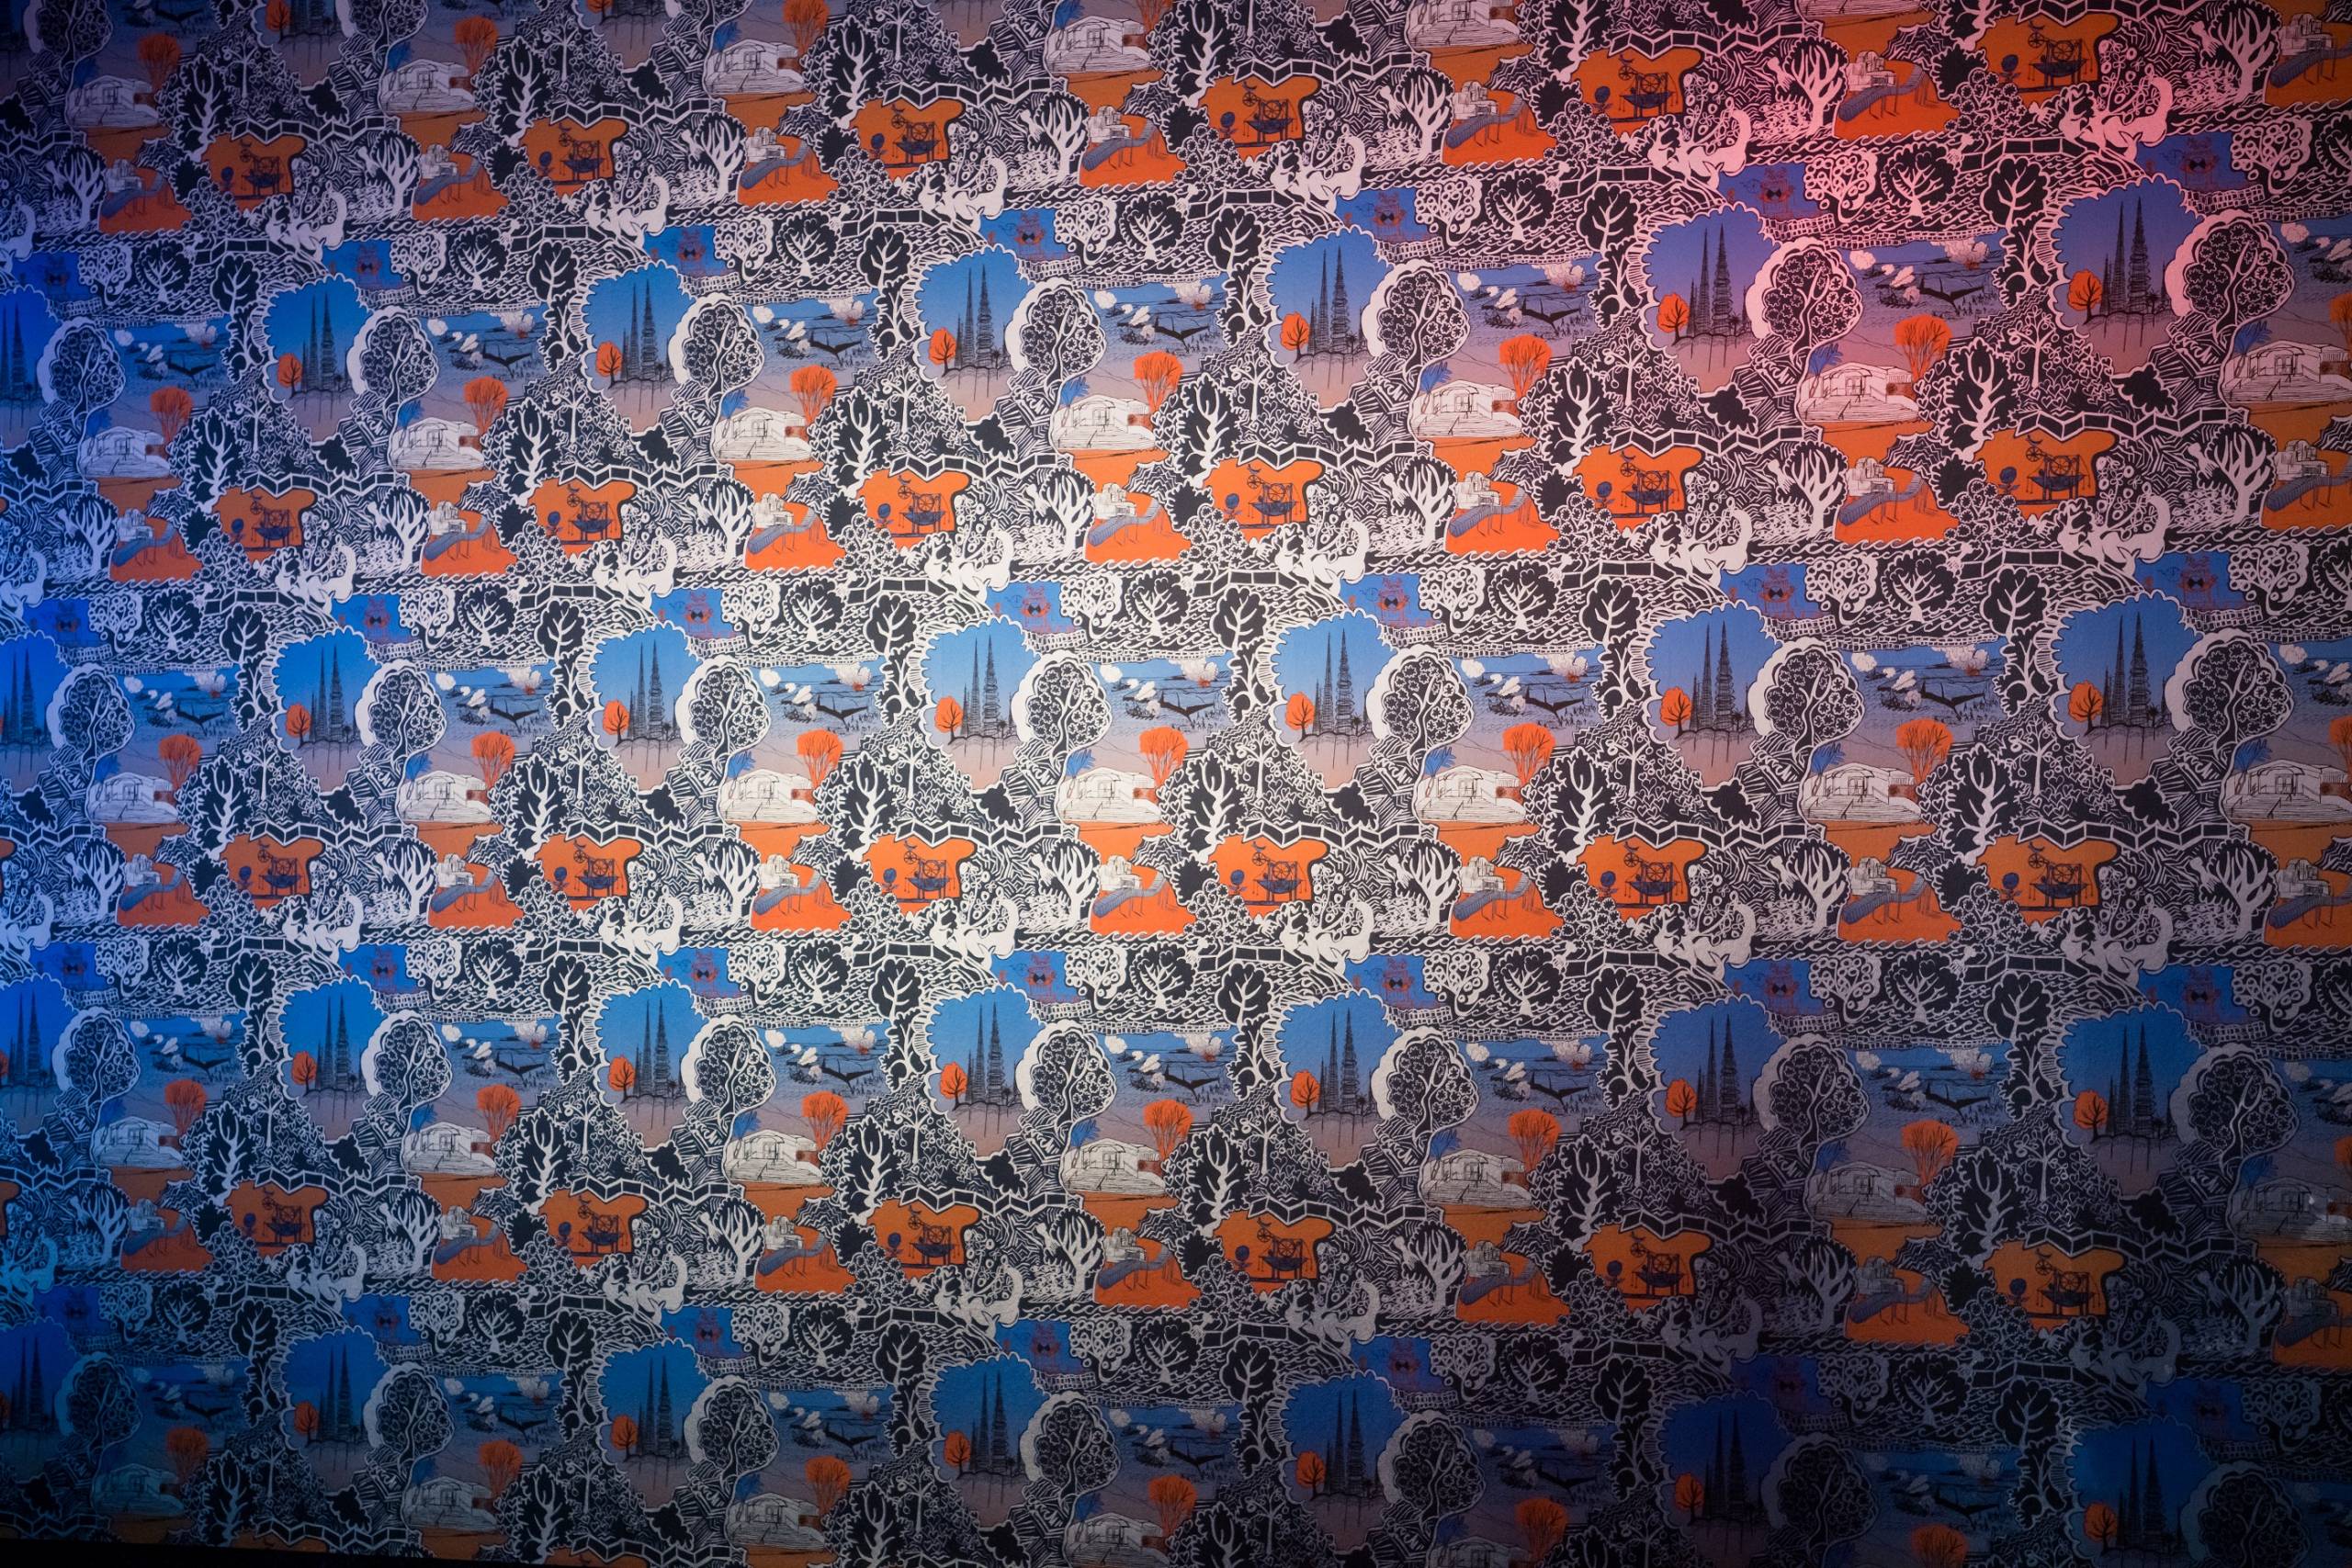 Wallpaper with an elaborate print in blue and orange